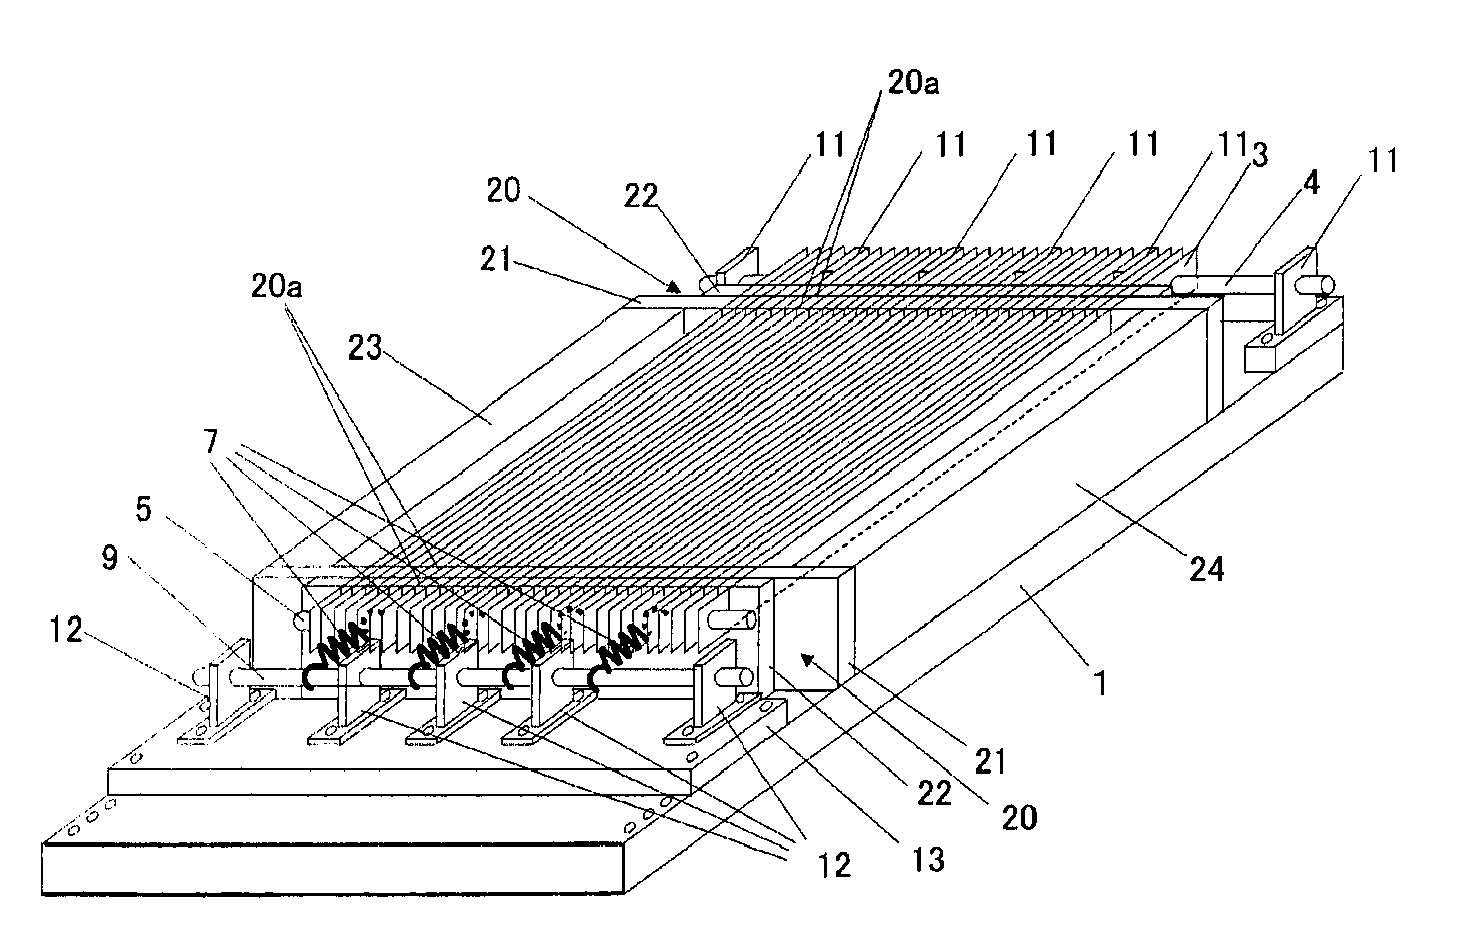 Manufacturing method of scattered radiation removing grid